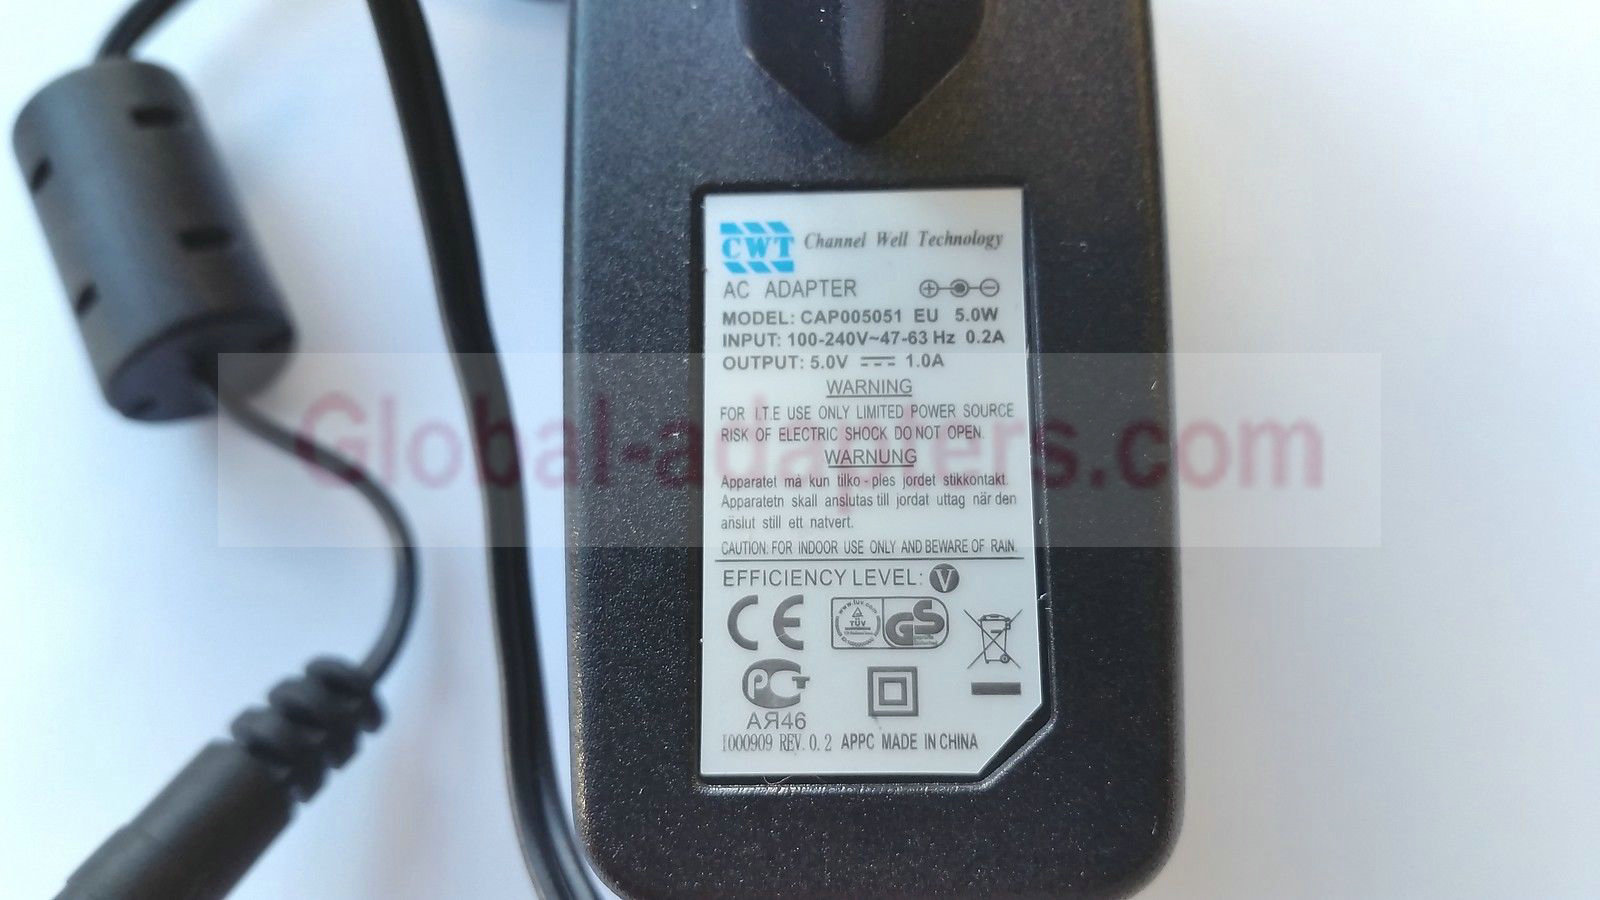 NEW 5V 1A CHANNEL WELL TECHNOLOGY CWT CAP005051 EU AC ADAPTER 52-01020004G000 - Click Image to Close